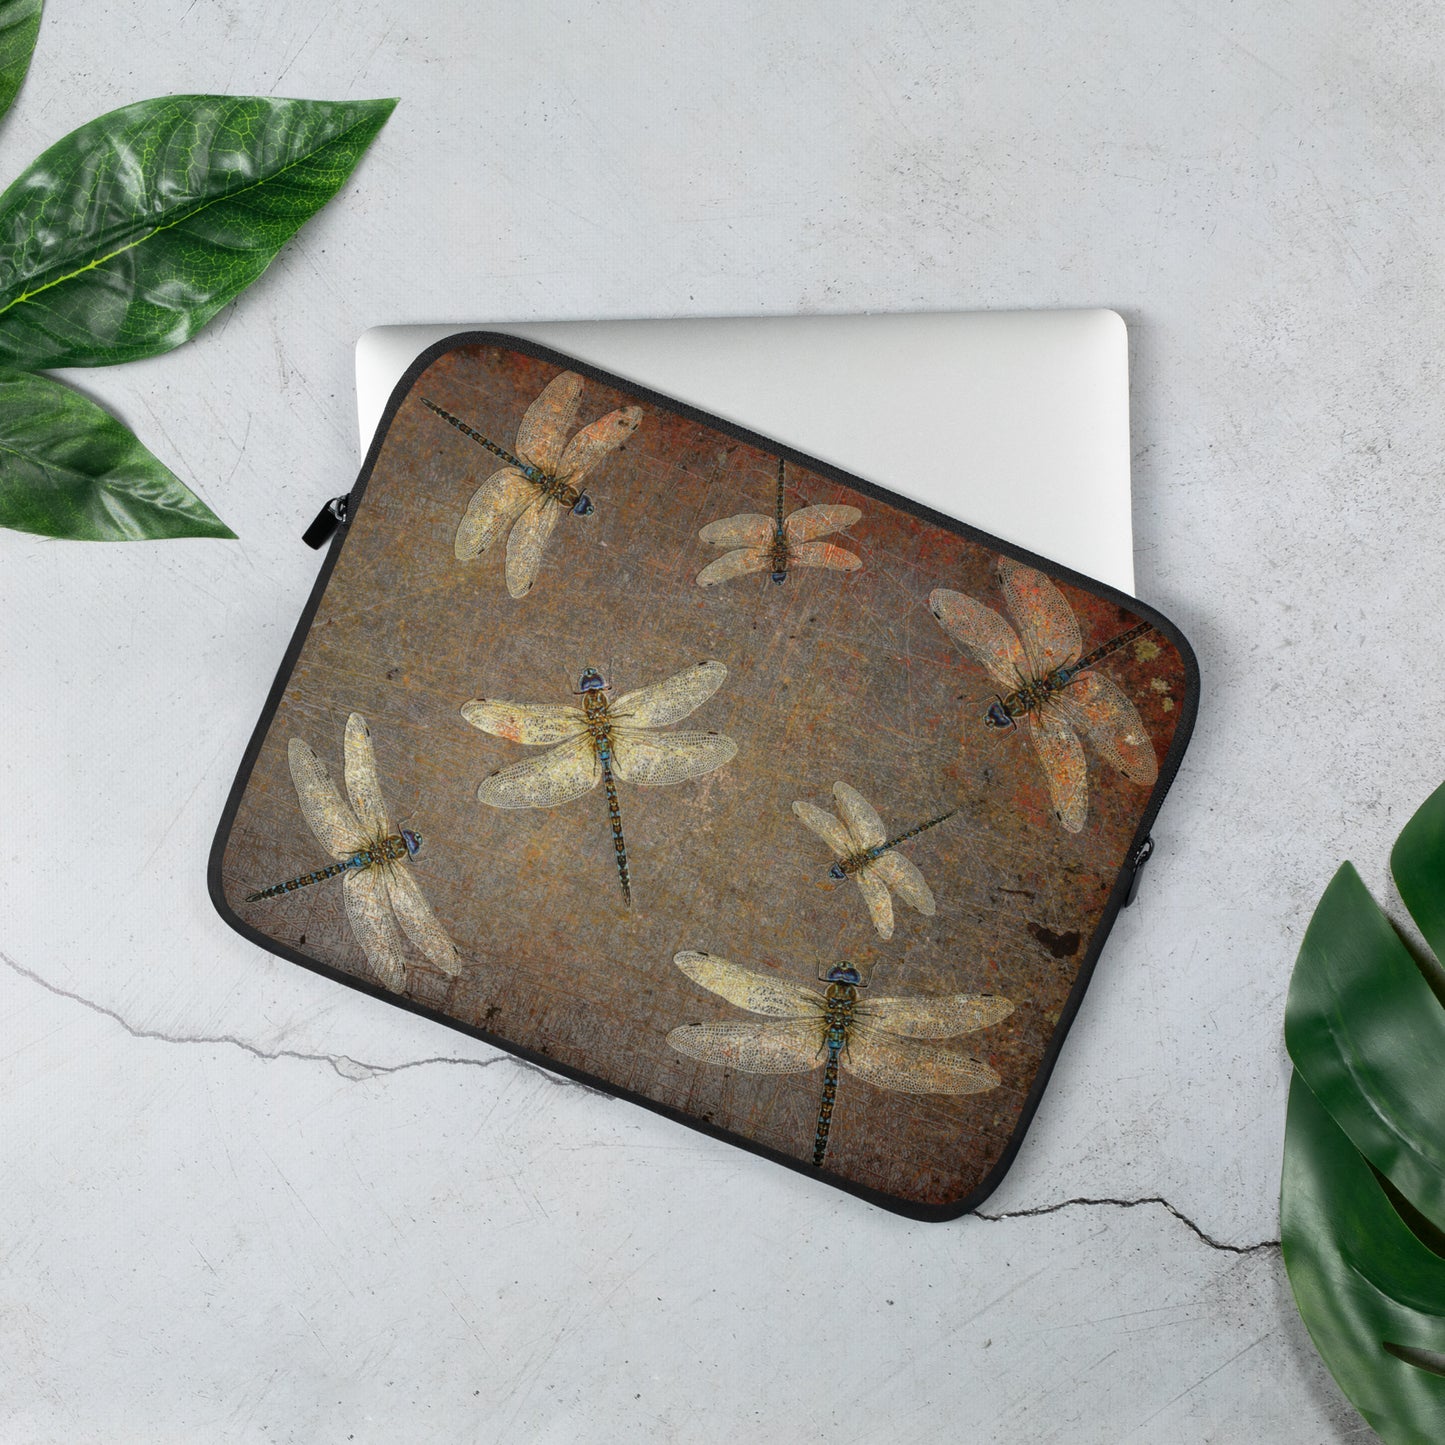 Swarm of Dragonflies on Distressed Background Laptop, Surface or MacBook Neoprene Sleeve 13 inches